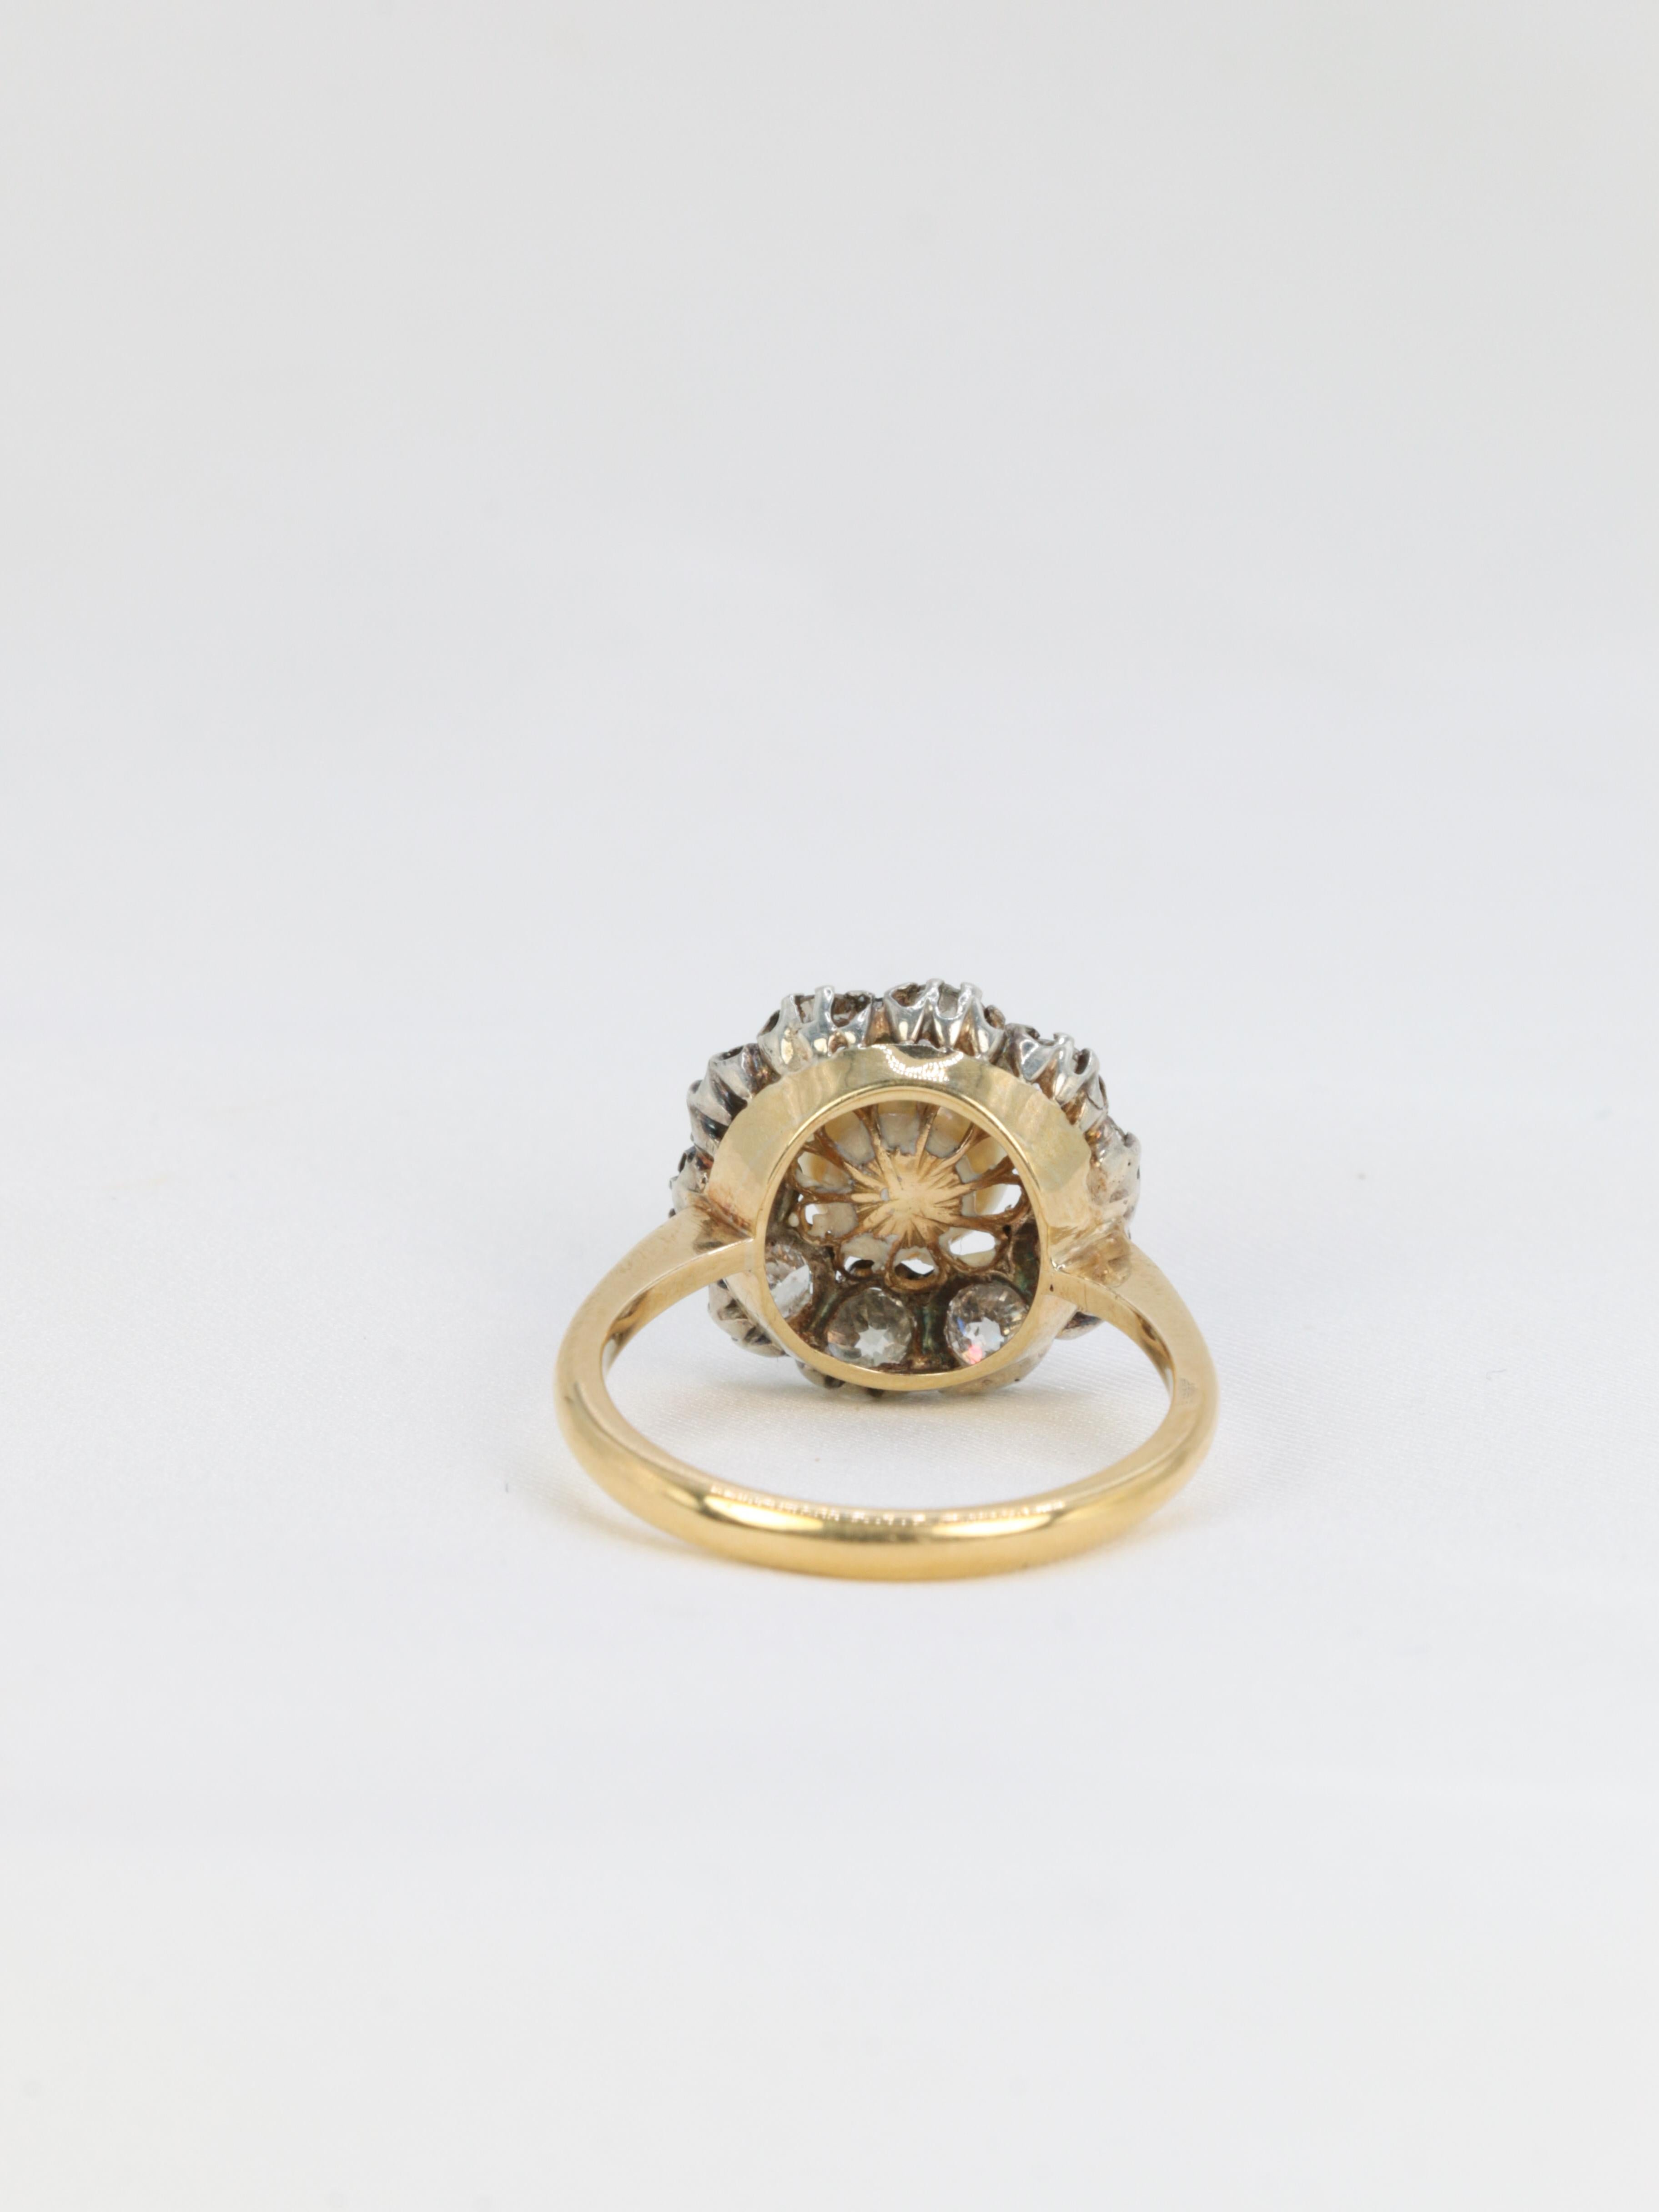 Edwardian Gold and Silver Cluster Ring with Old Mine Cut Diamonds and a Natural For Sale 1